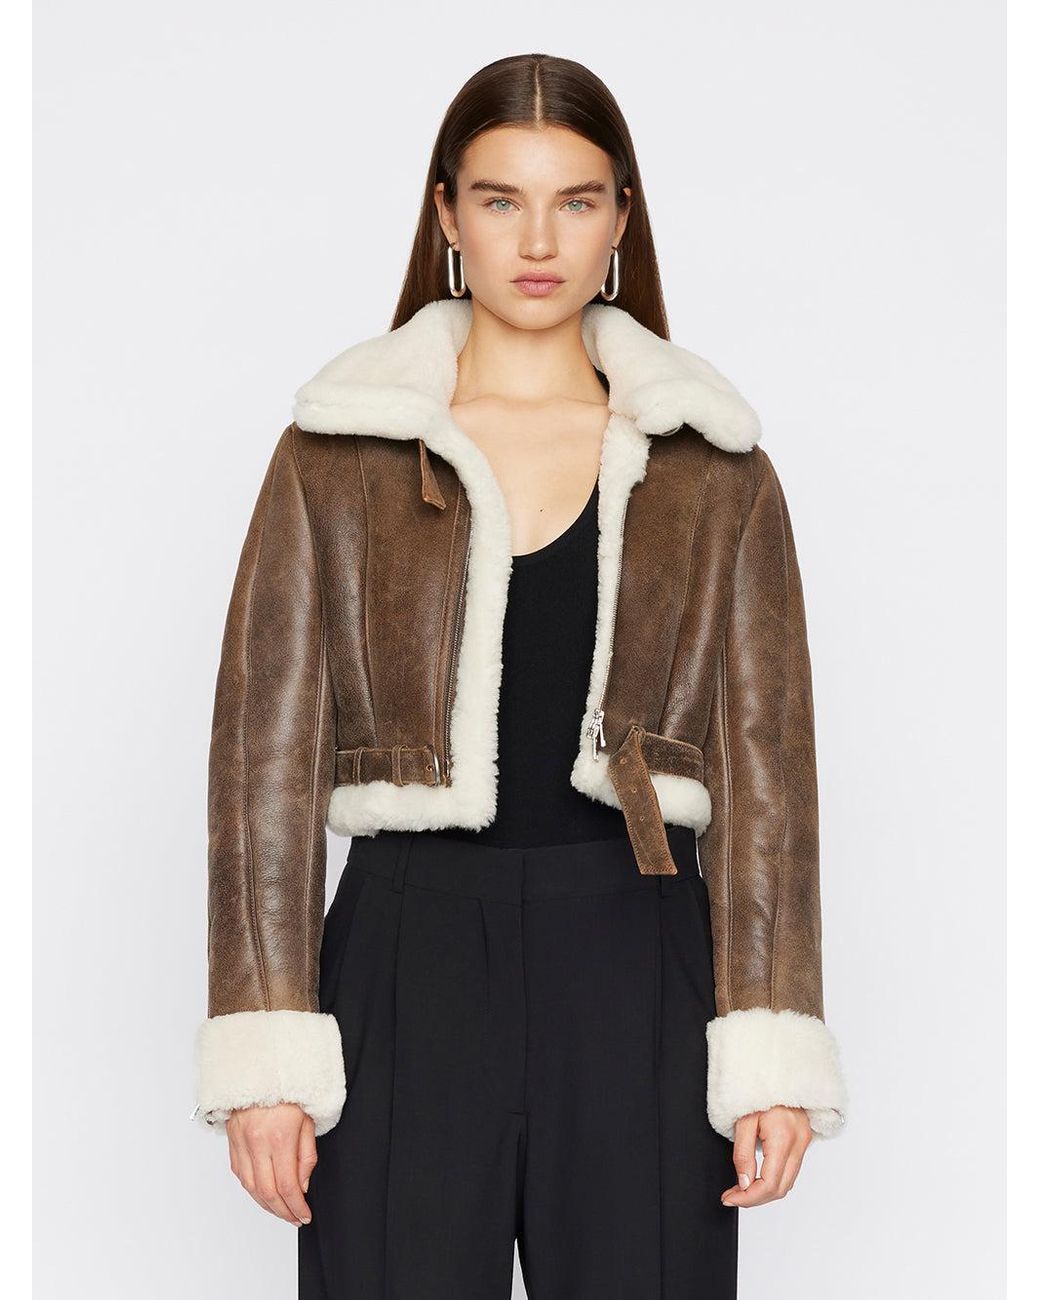 FRAME Cropped Shearling Moto Jacket in Natural | Lyst